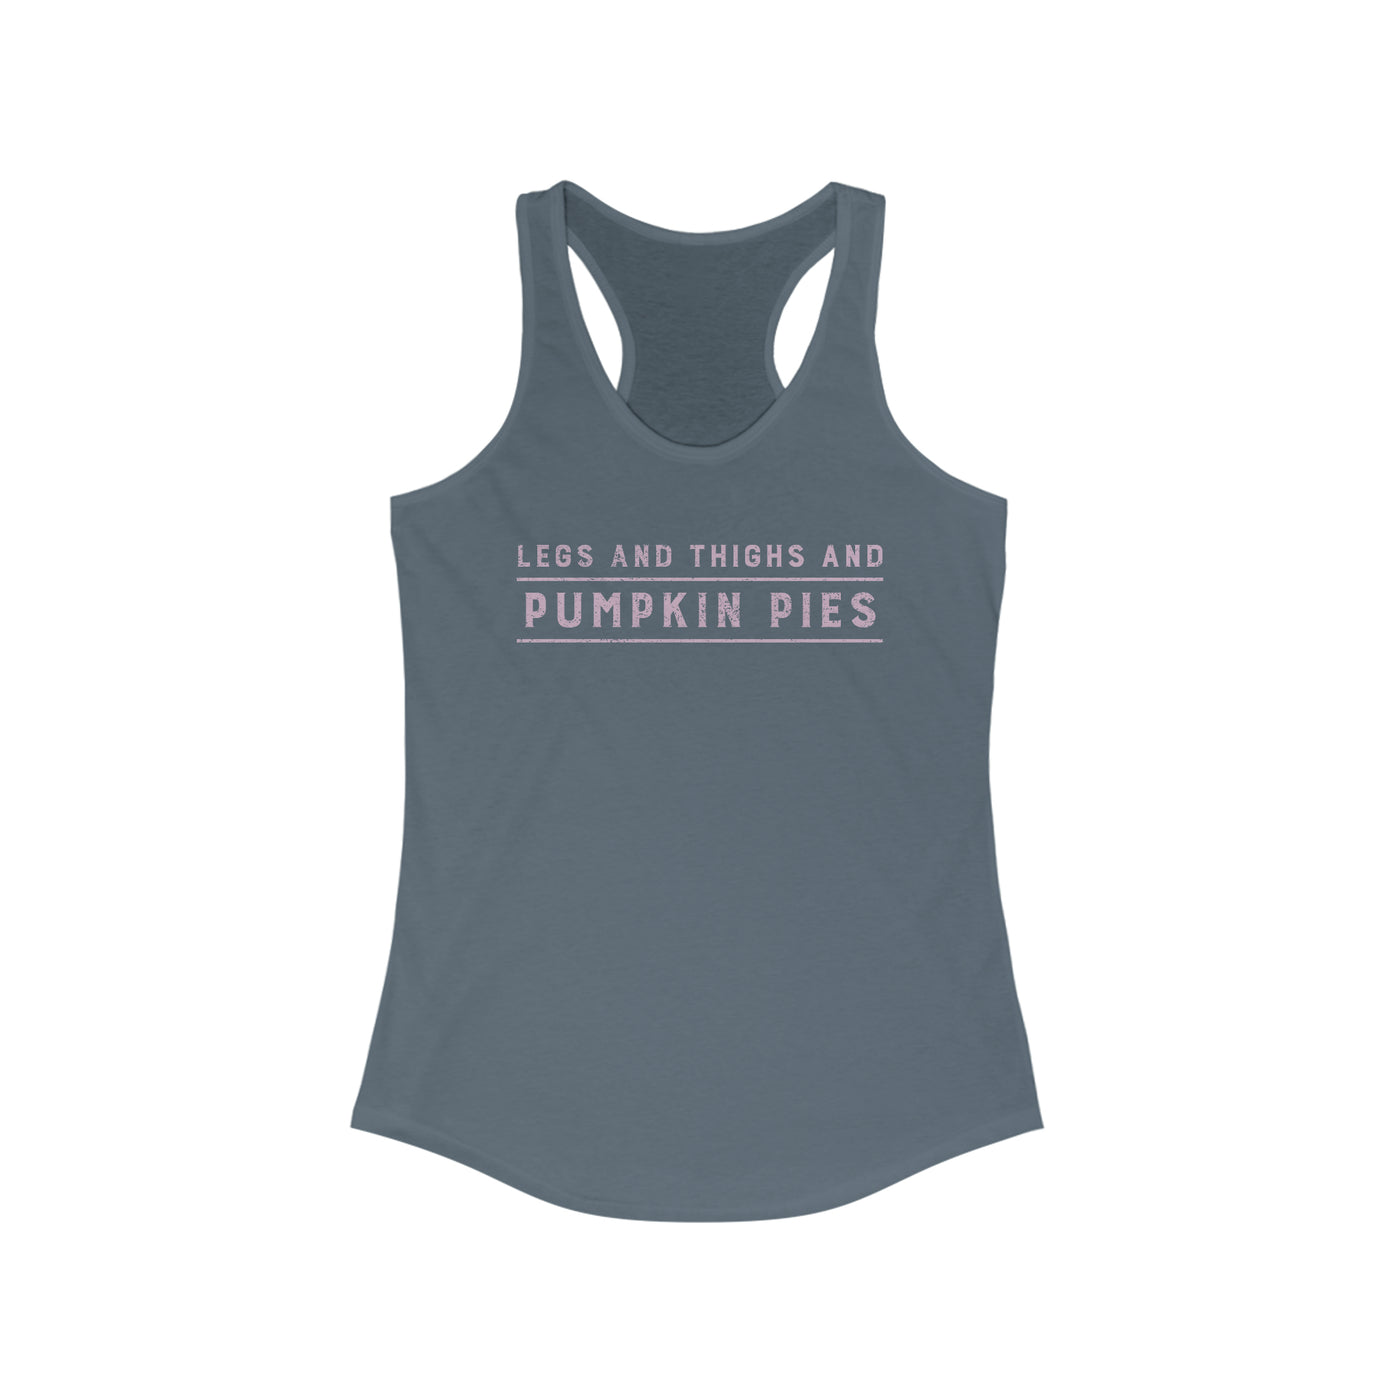 Legs And Thighs And Pumpkin Pies Women's Racerback Tank